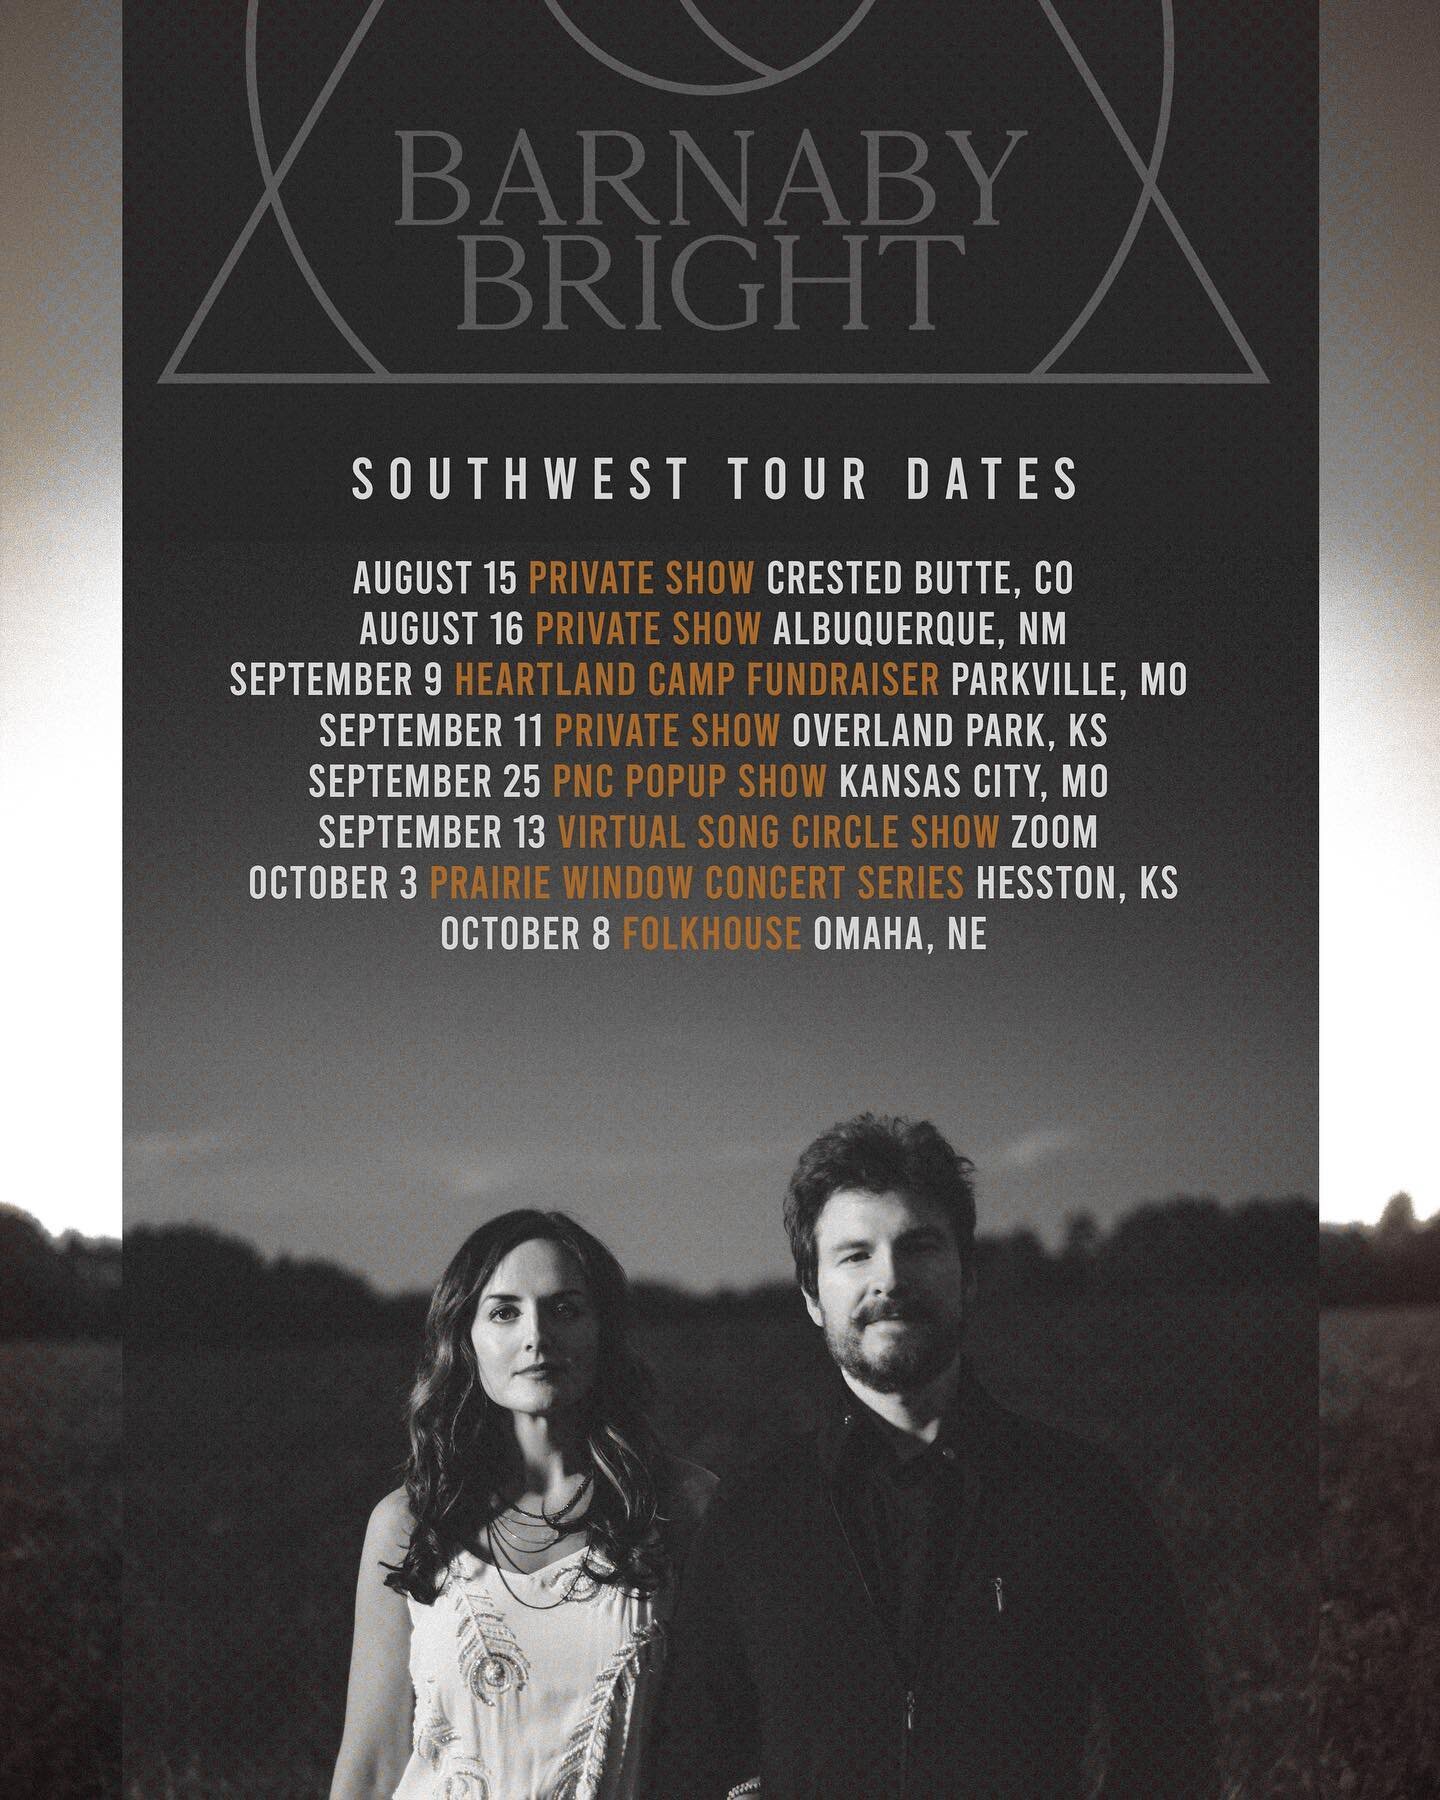 Can&rsquo;t remember the last time we shared a tour poster! What a relief to be playing live again. 🥳 More info about all of these shows can be found on our website! 
.
.
.
#ontheroadagain #livemusic #liveshows #folk #pop #duo #records #tour #music 